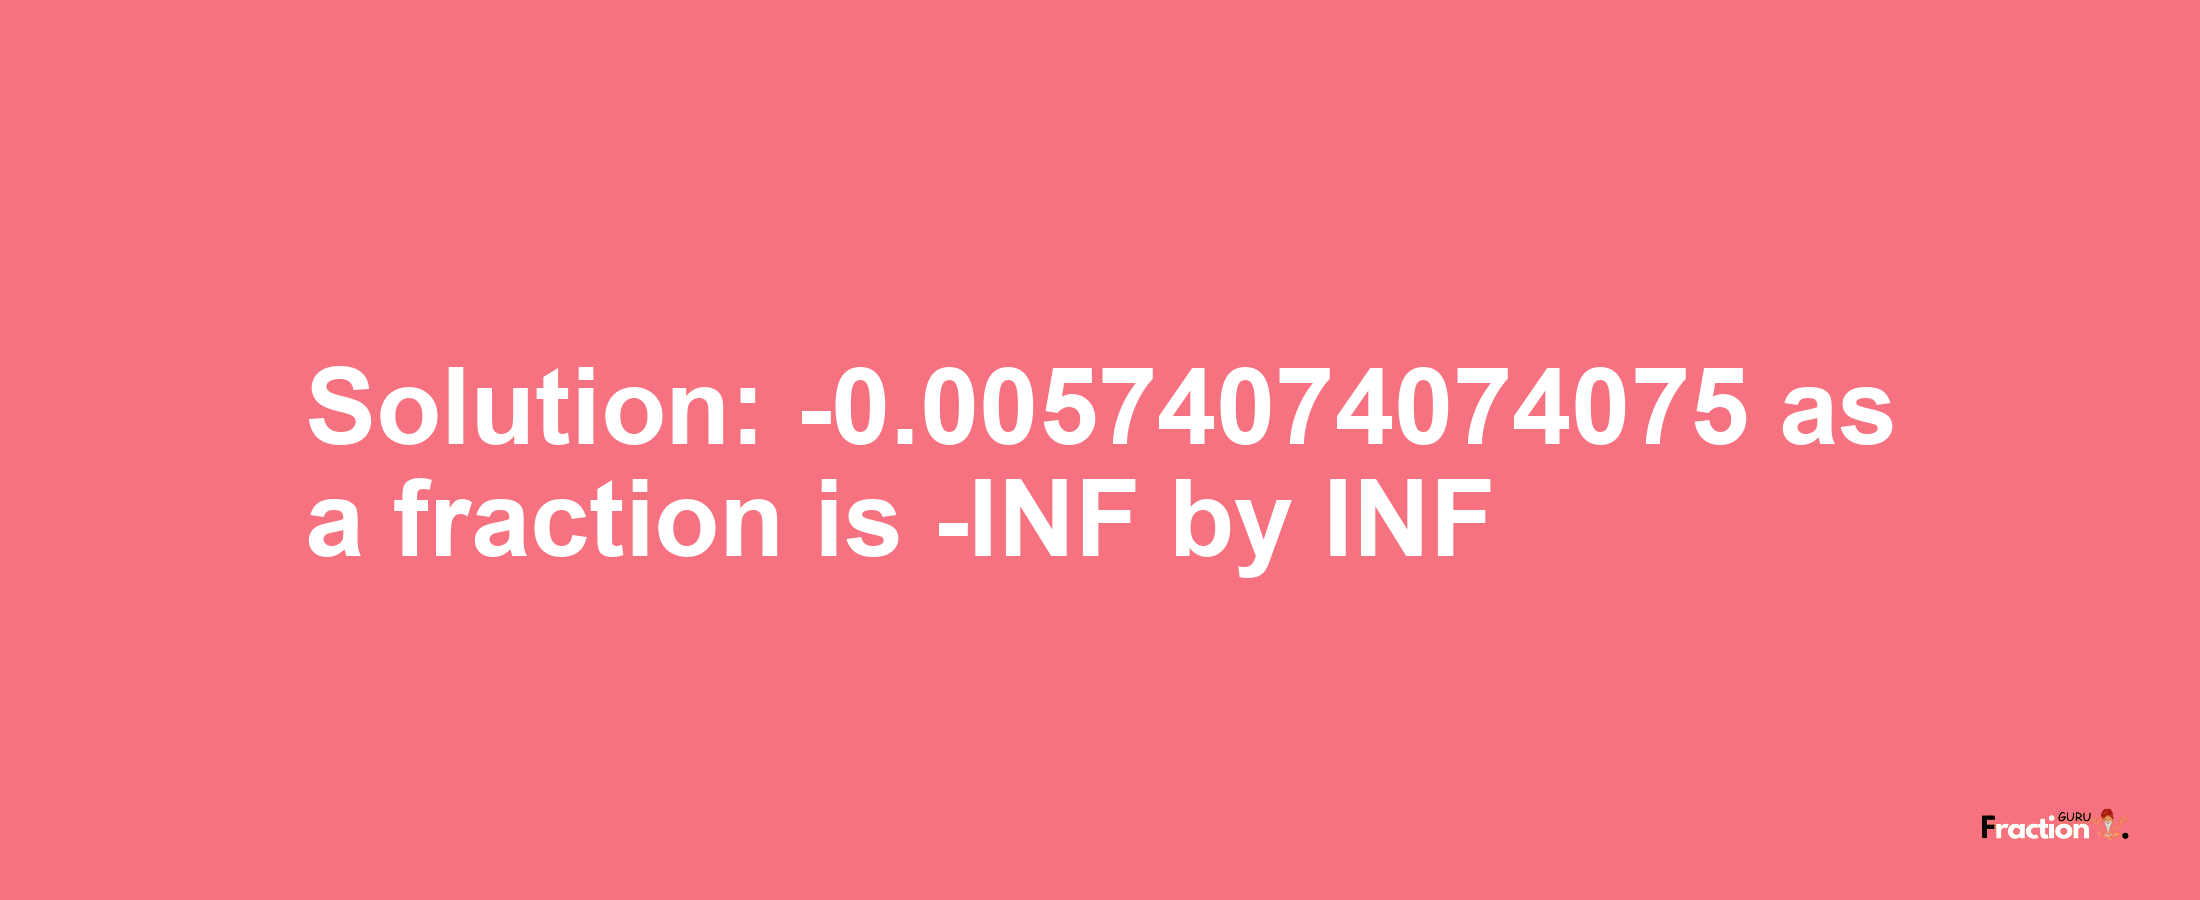 Solution:-0.00574074074075 as a fraction is -INF/INF